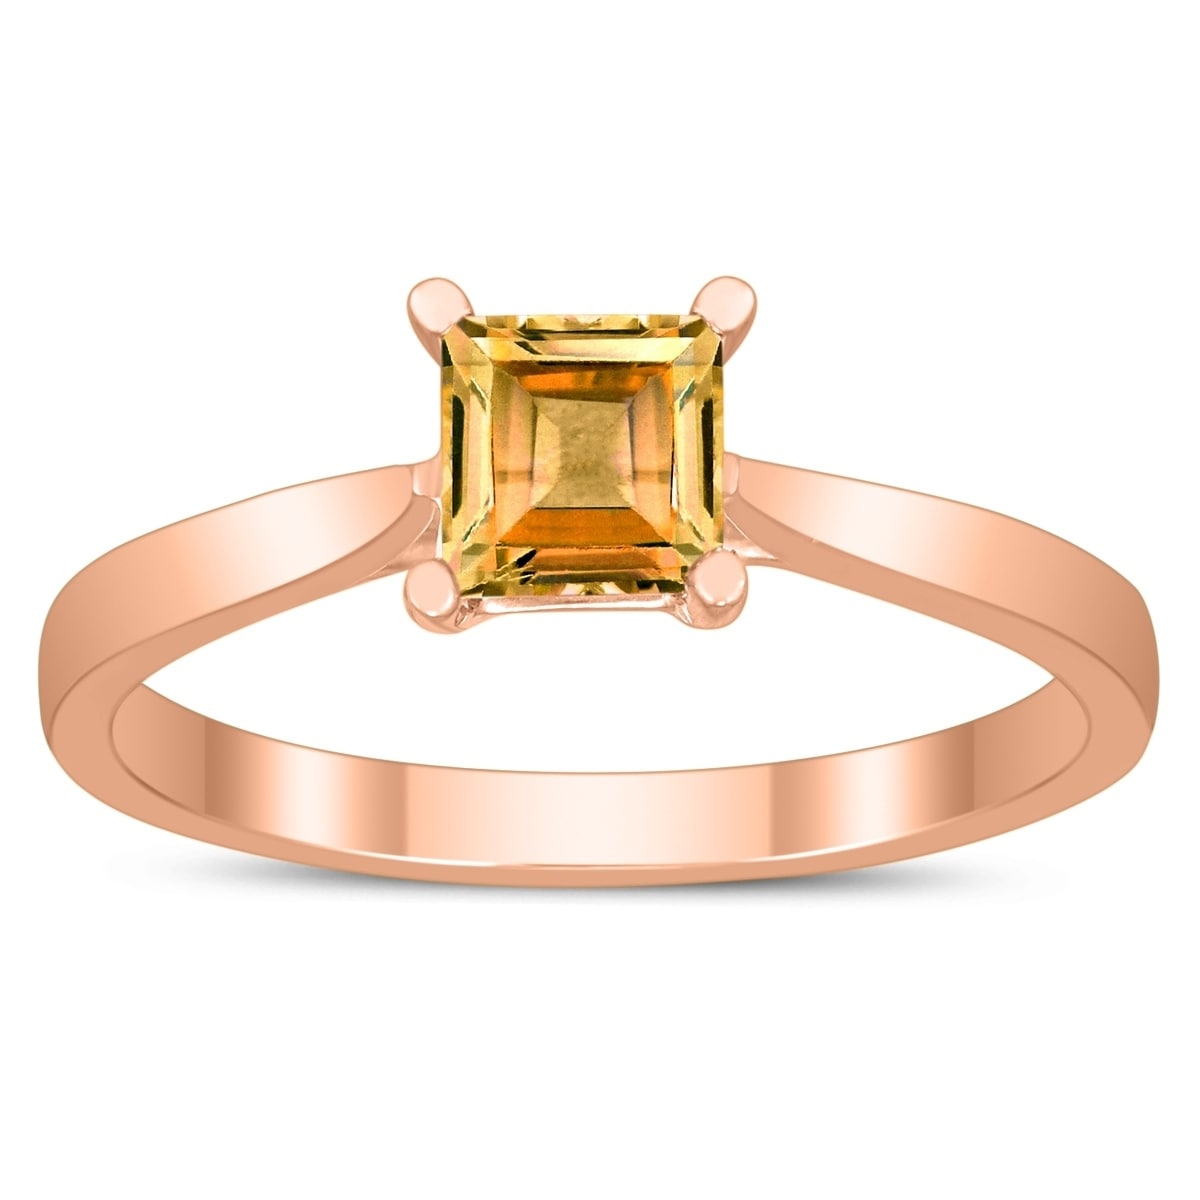 Square Princess Cut 5MM Citrine Solitaire Ring in 10K Rose Gold